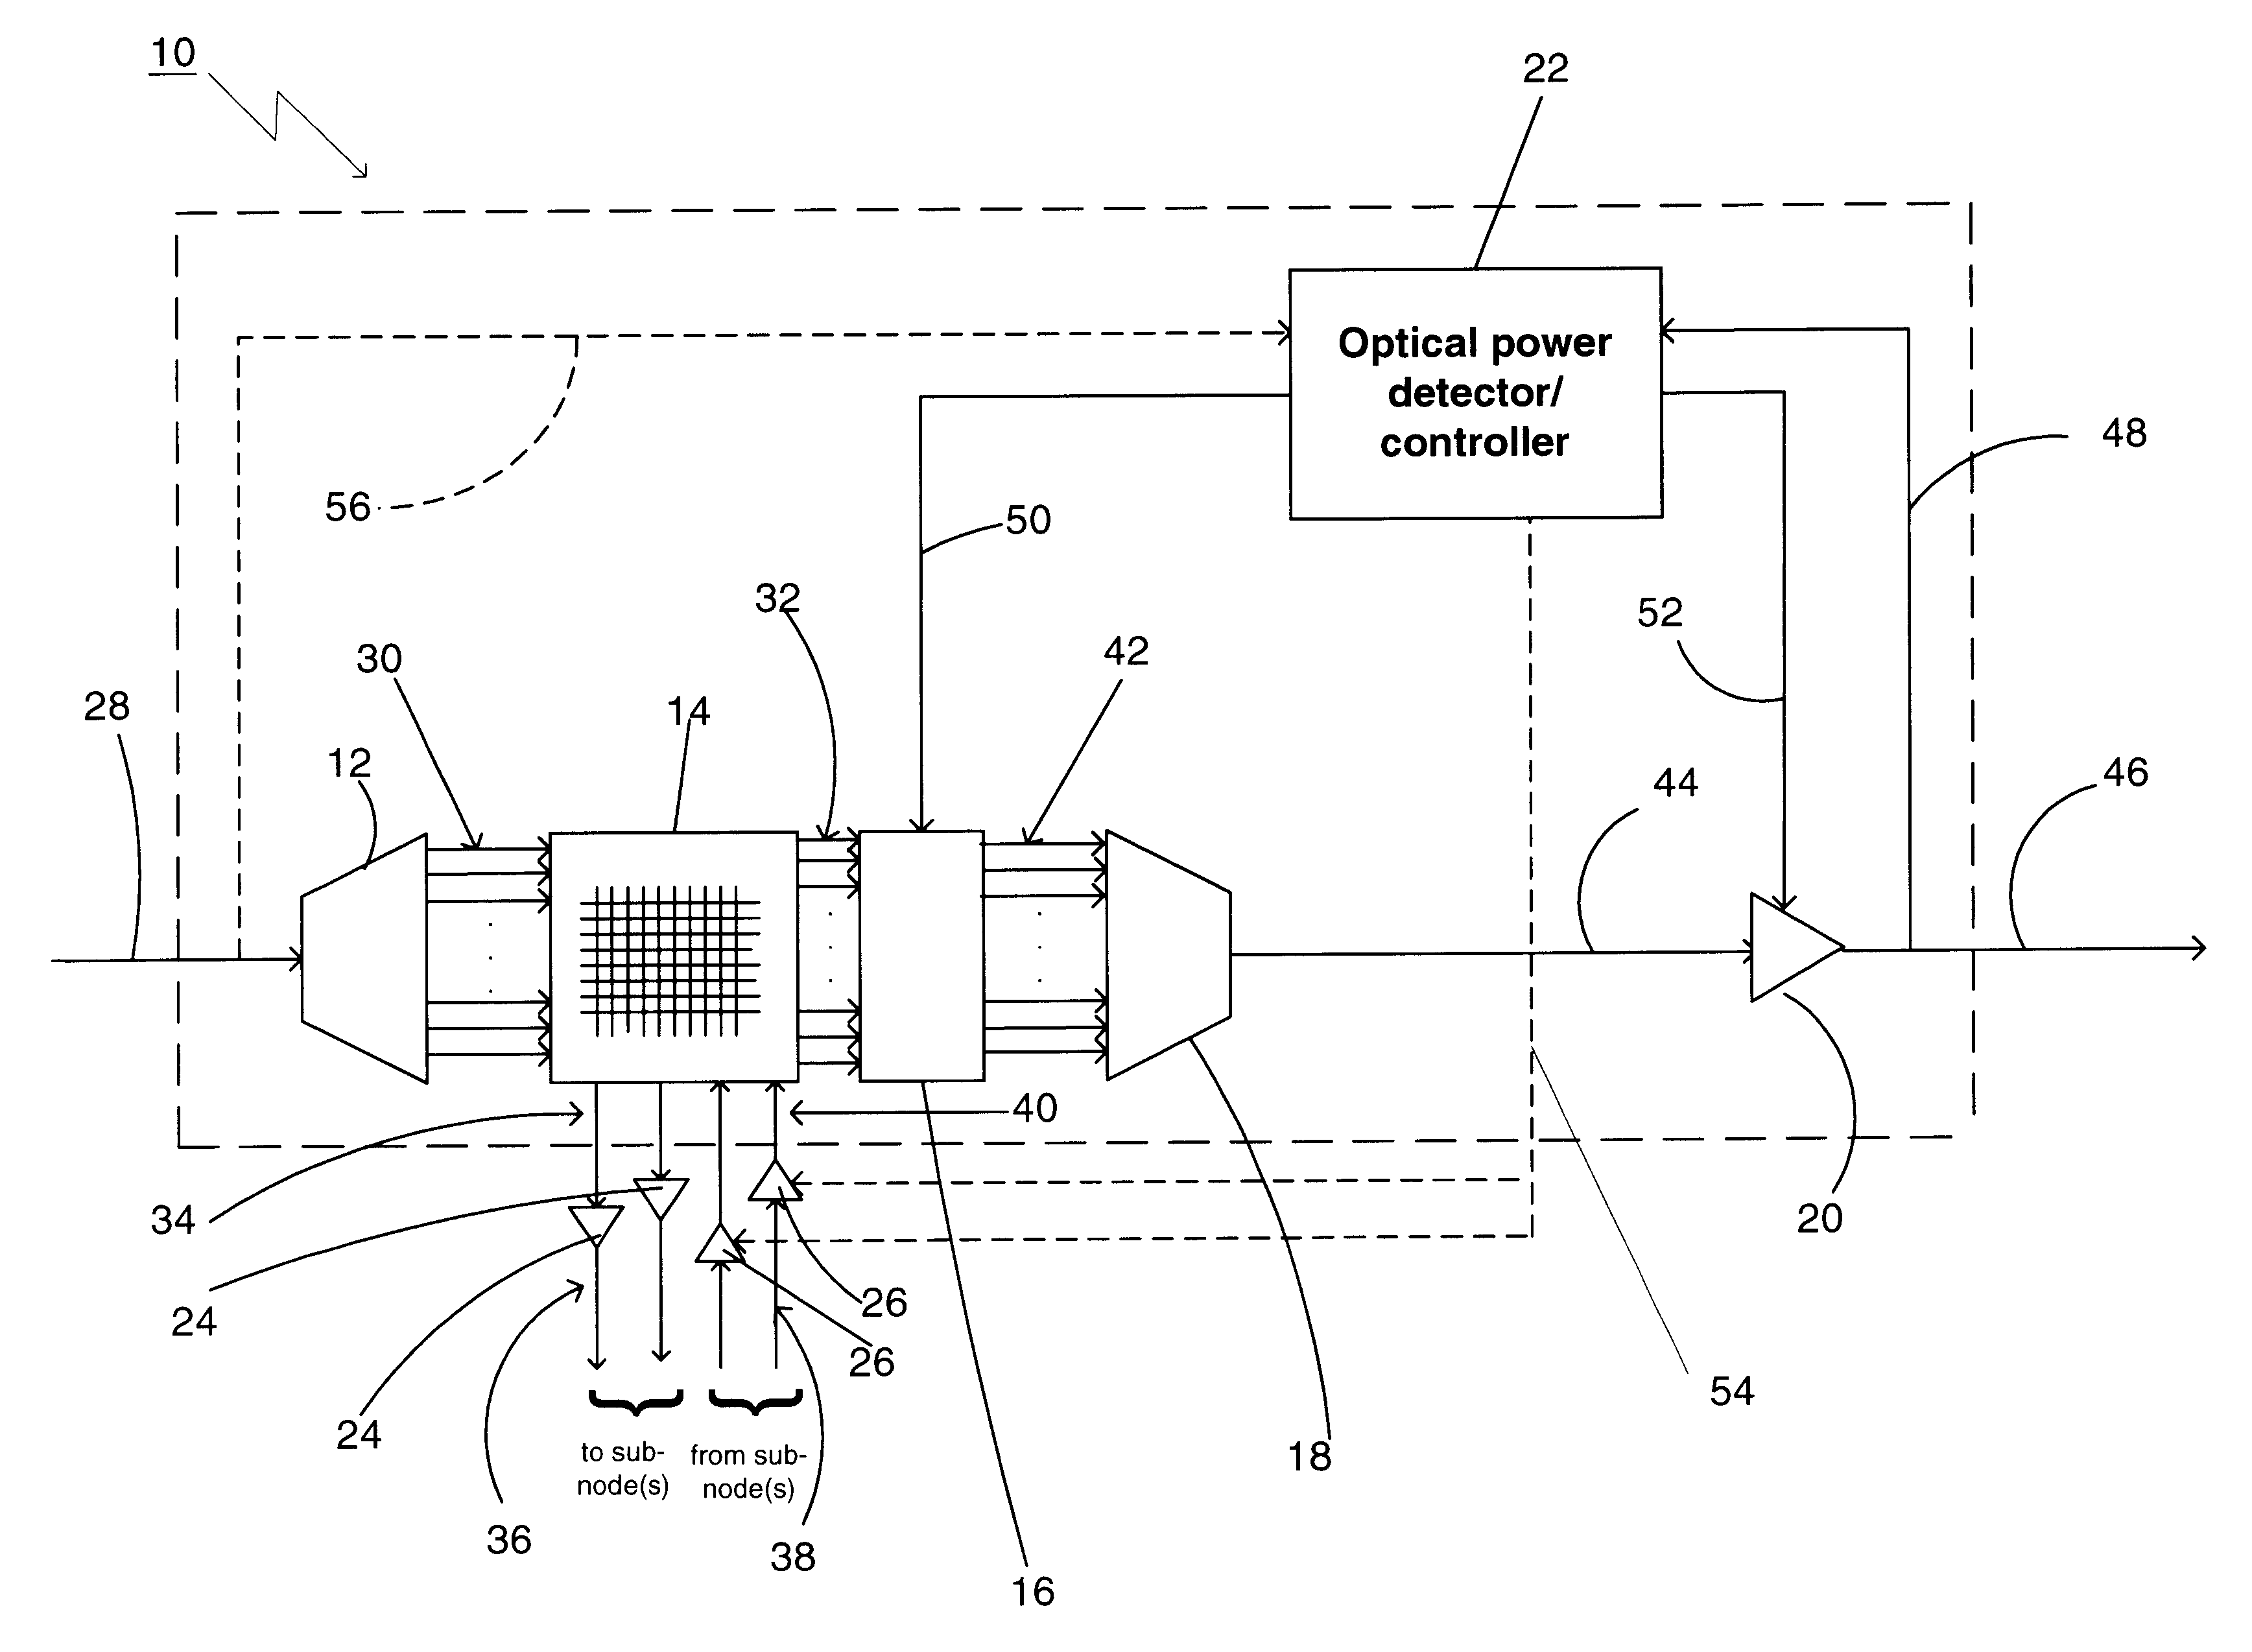 Optical power managed network node for processing dense wavelength division multiplexed optical signals